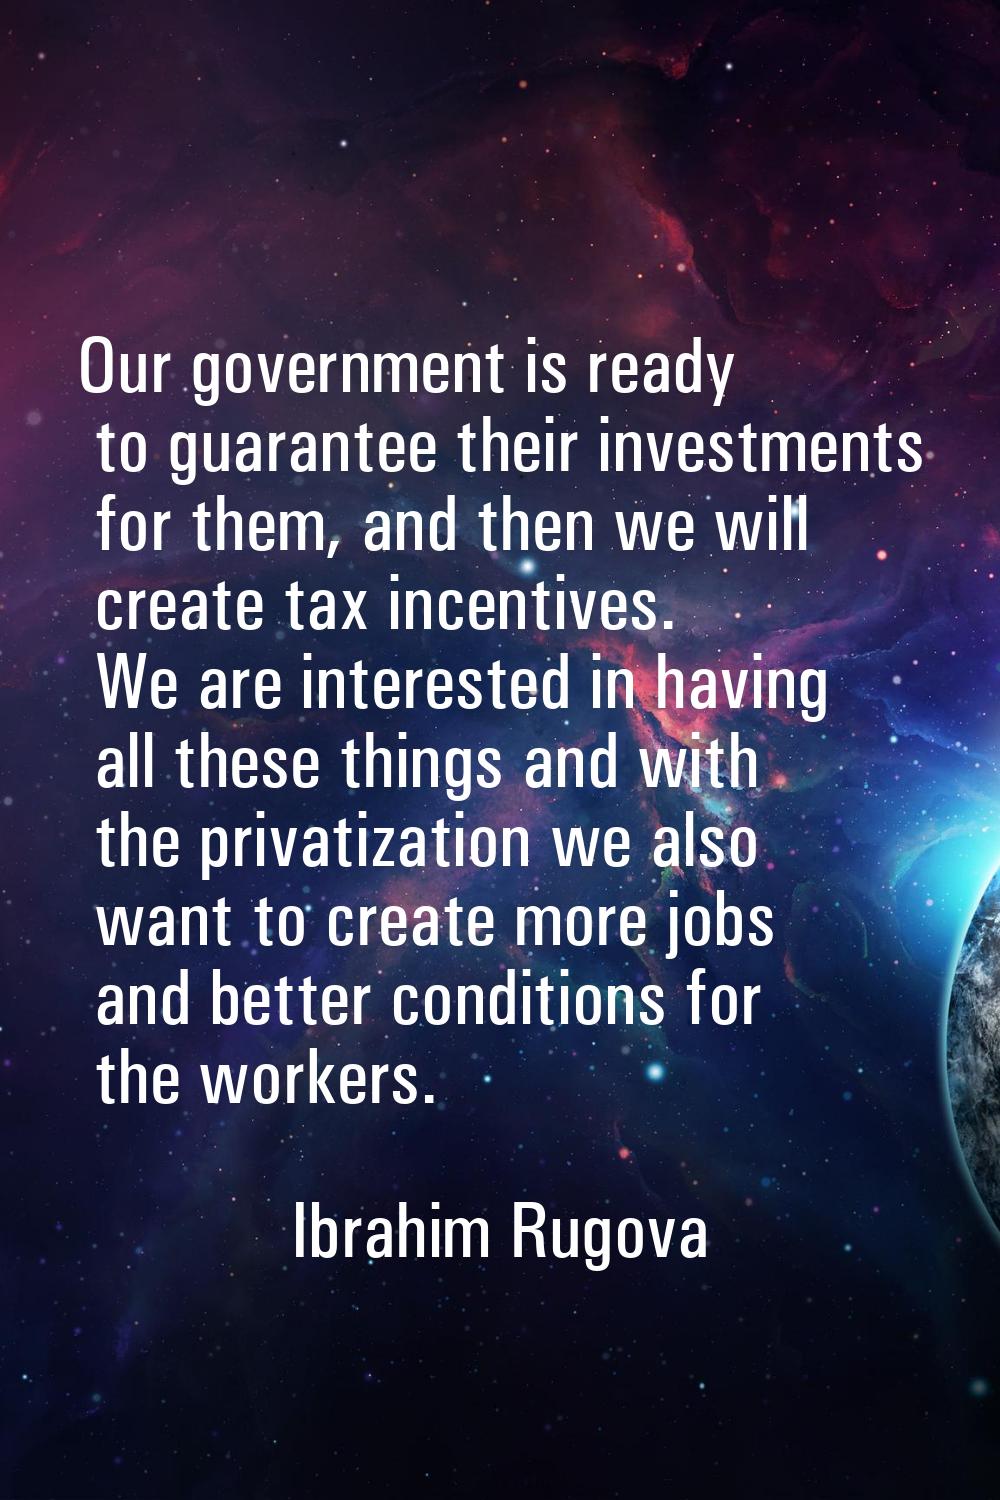 Our government is ready to guarantee their investments for them, and then we will create tax incent